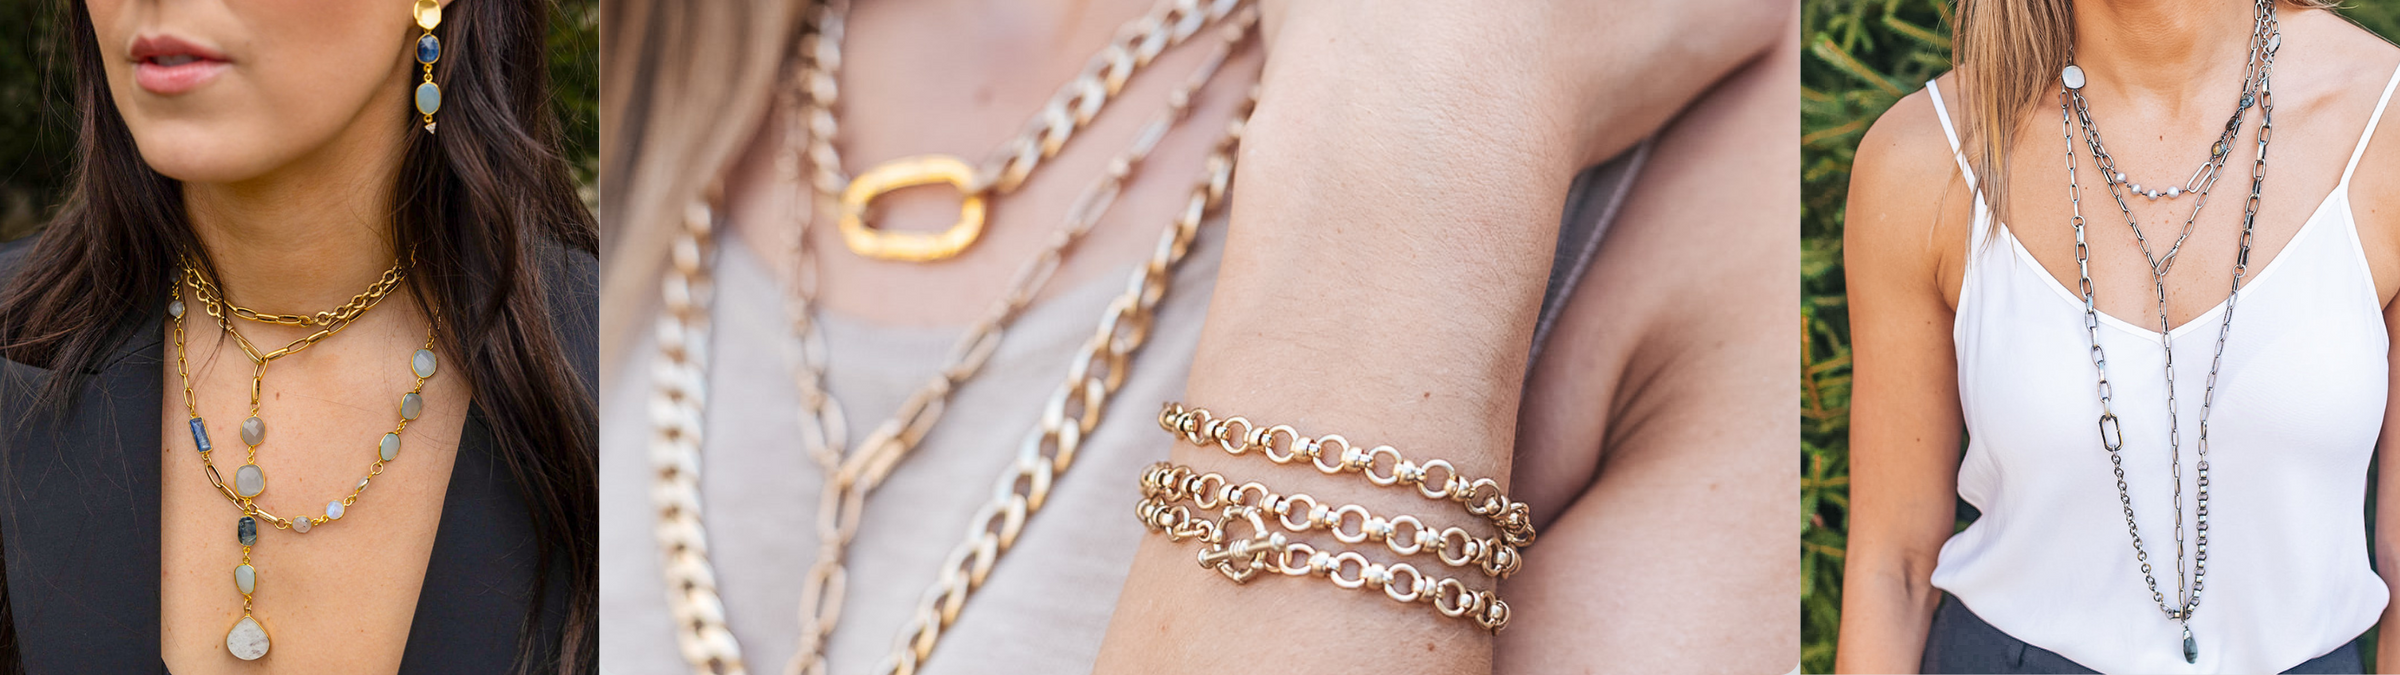 Versatile convertible jewelry by Loni Paul – endless ways to express your unique chic.